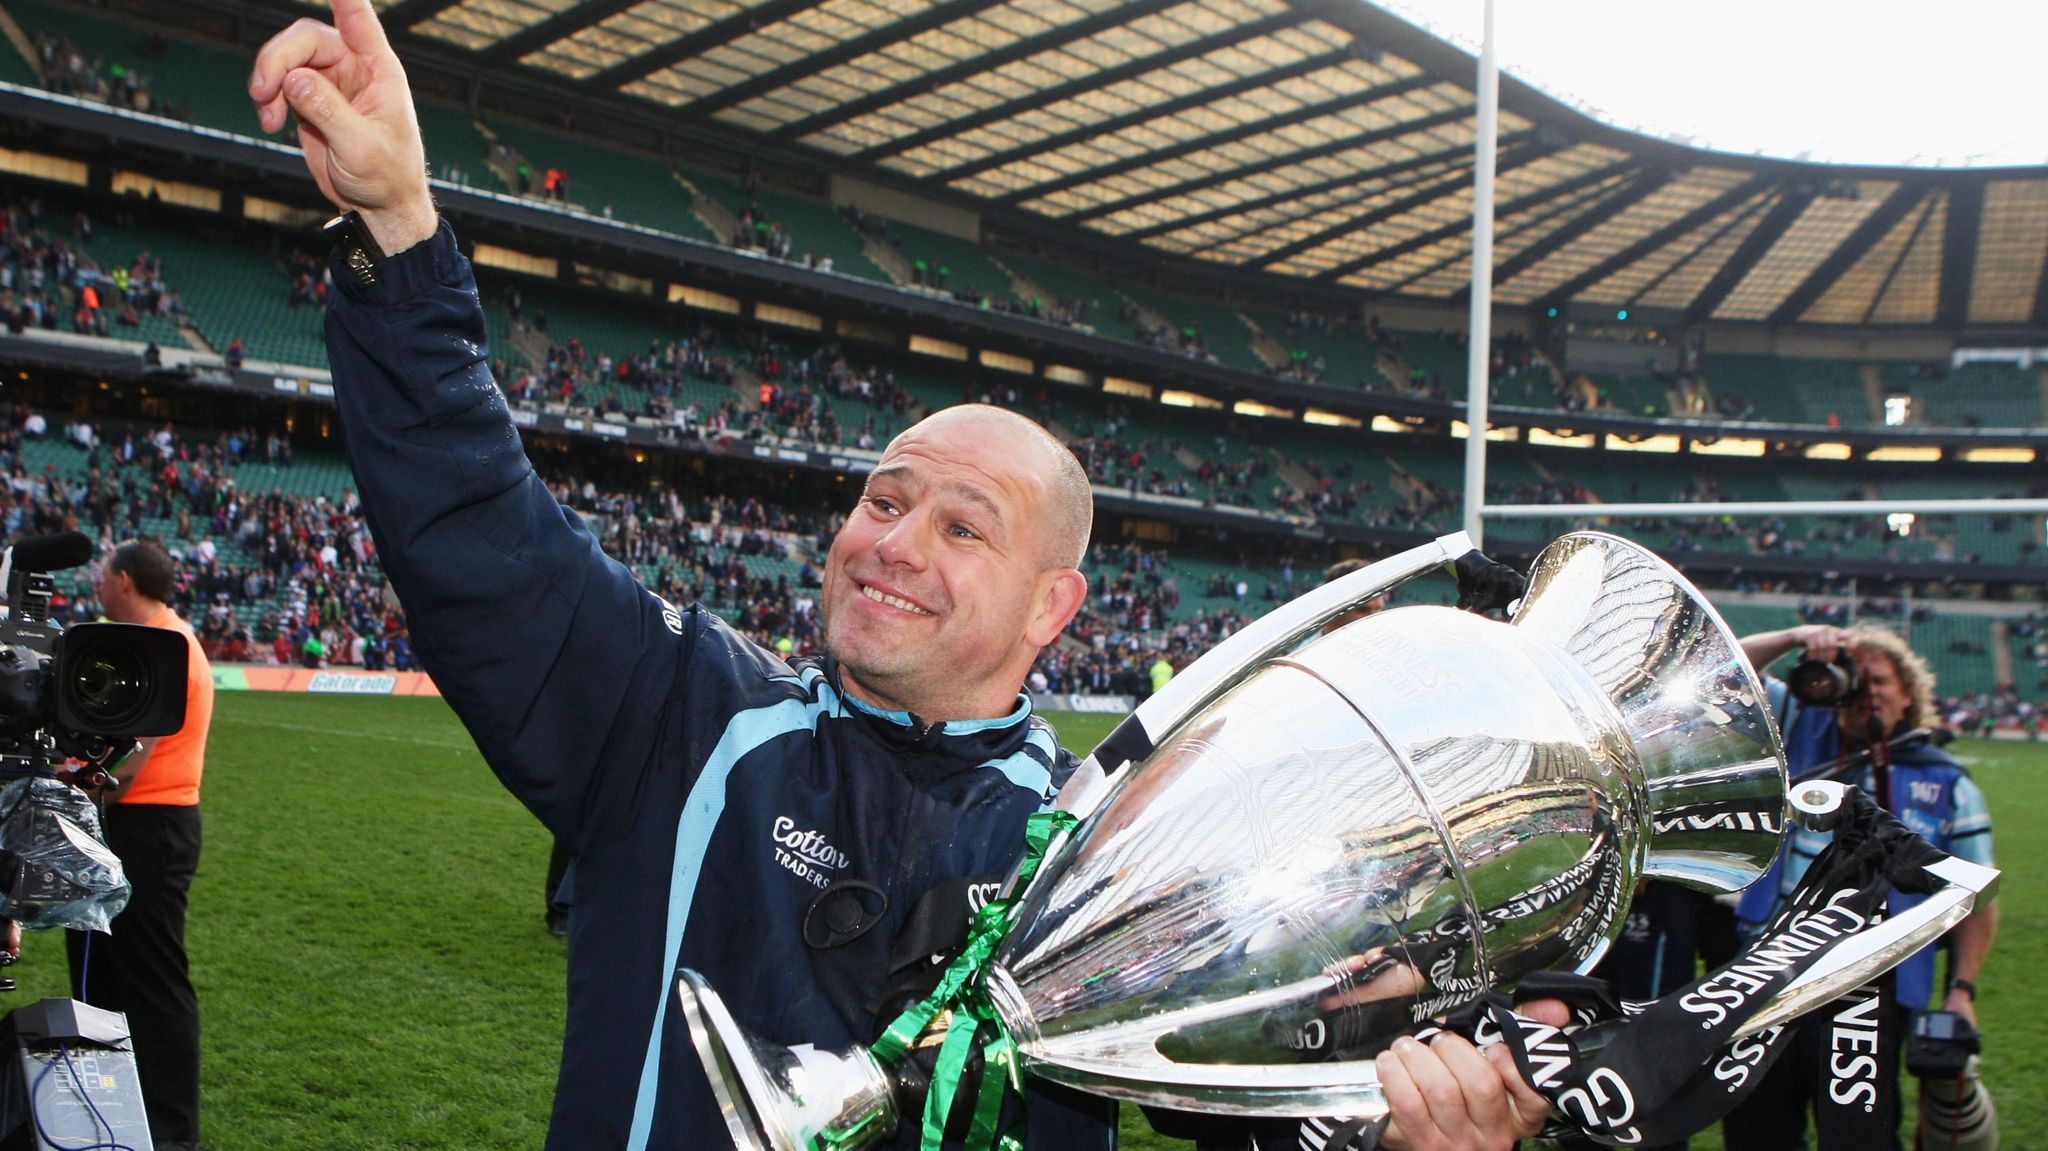 Richard Cockerill guided Leicester to Premiership wins in 2007, 2009, 2010 and 2013